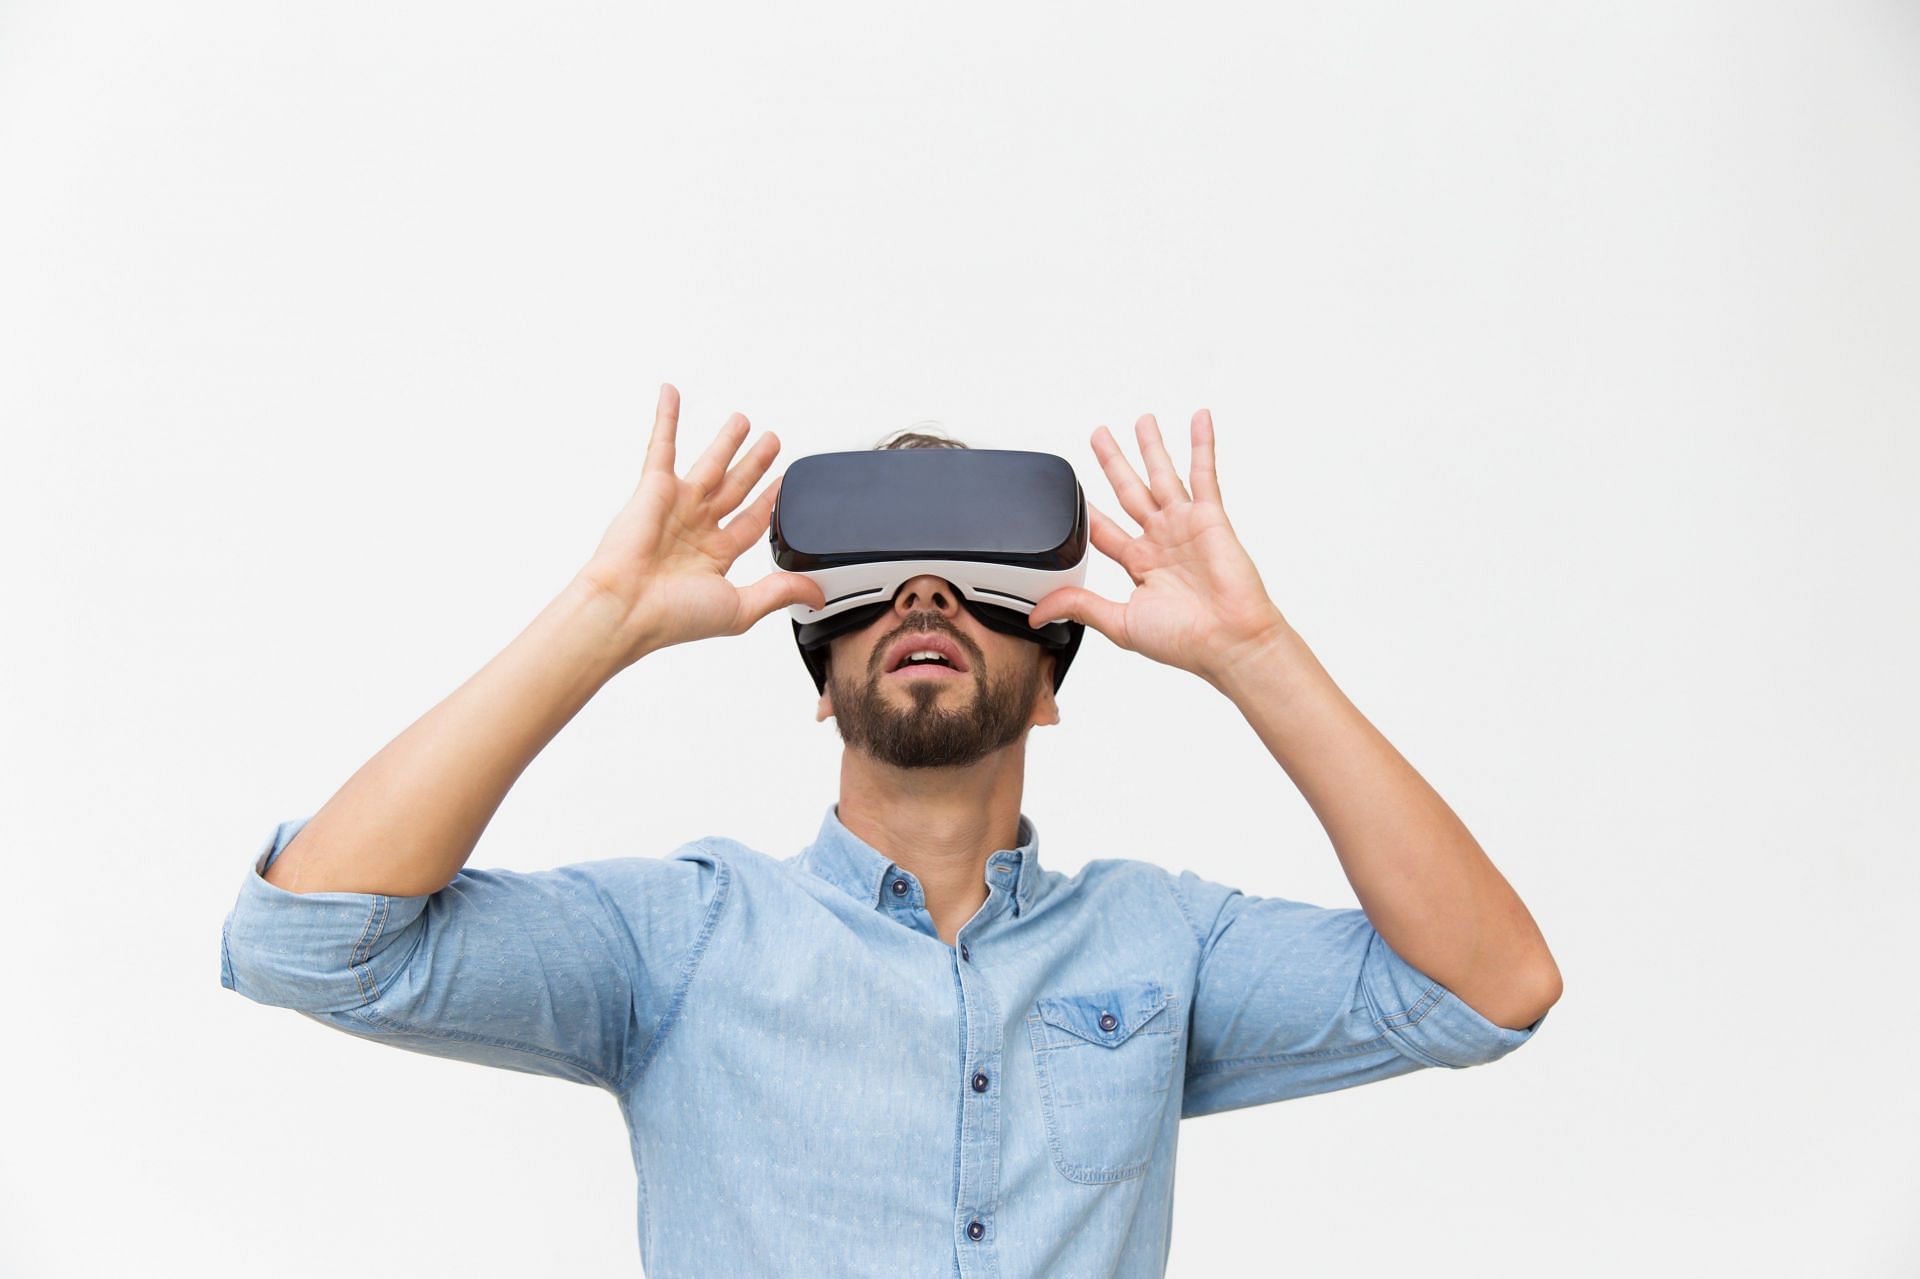 With advancing technology, therapists are also using VR tools. (Image via Freepik pch.vector)